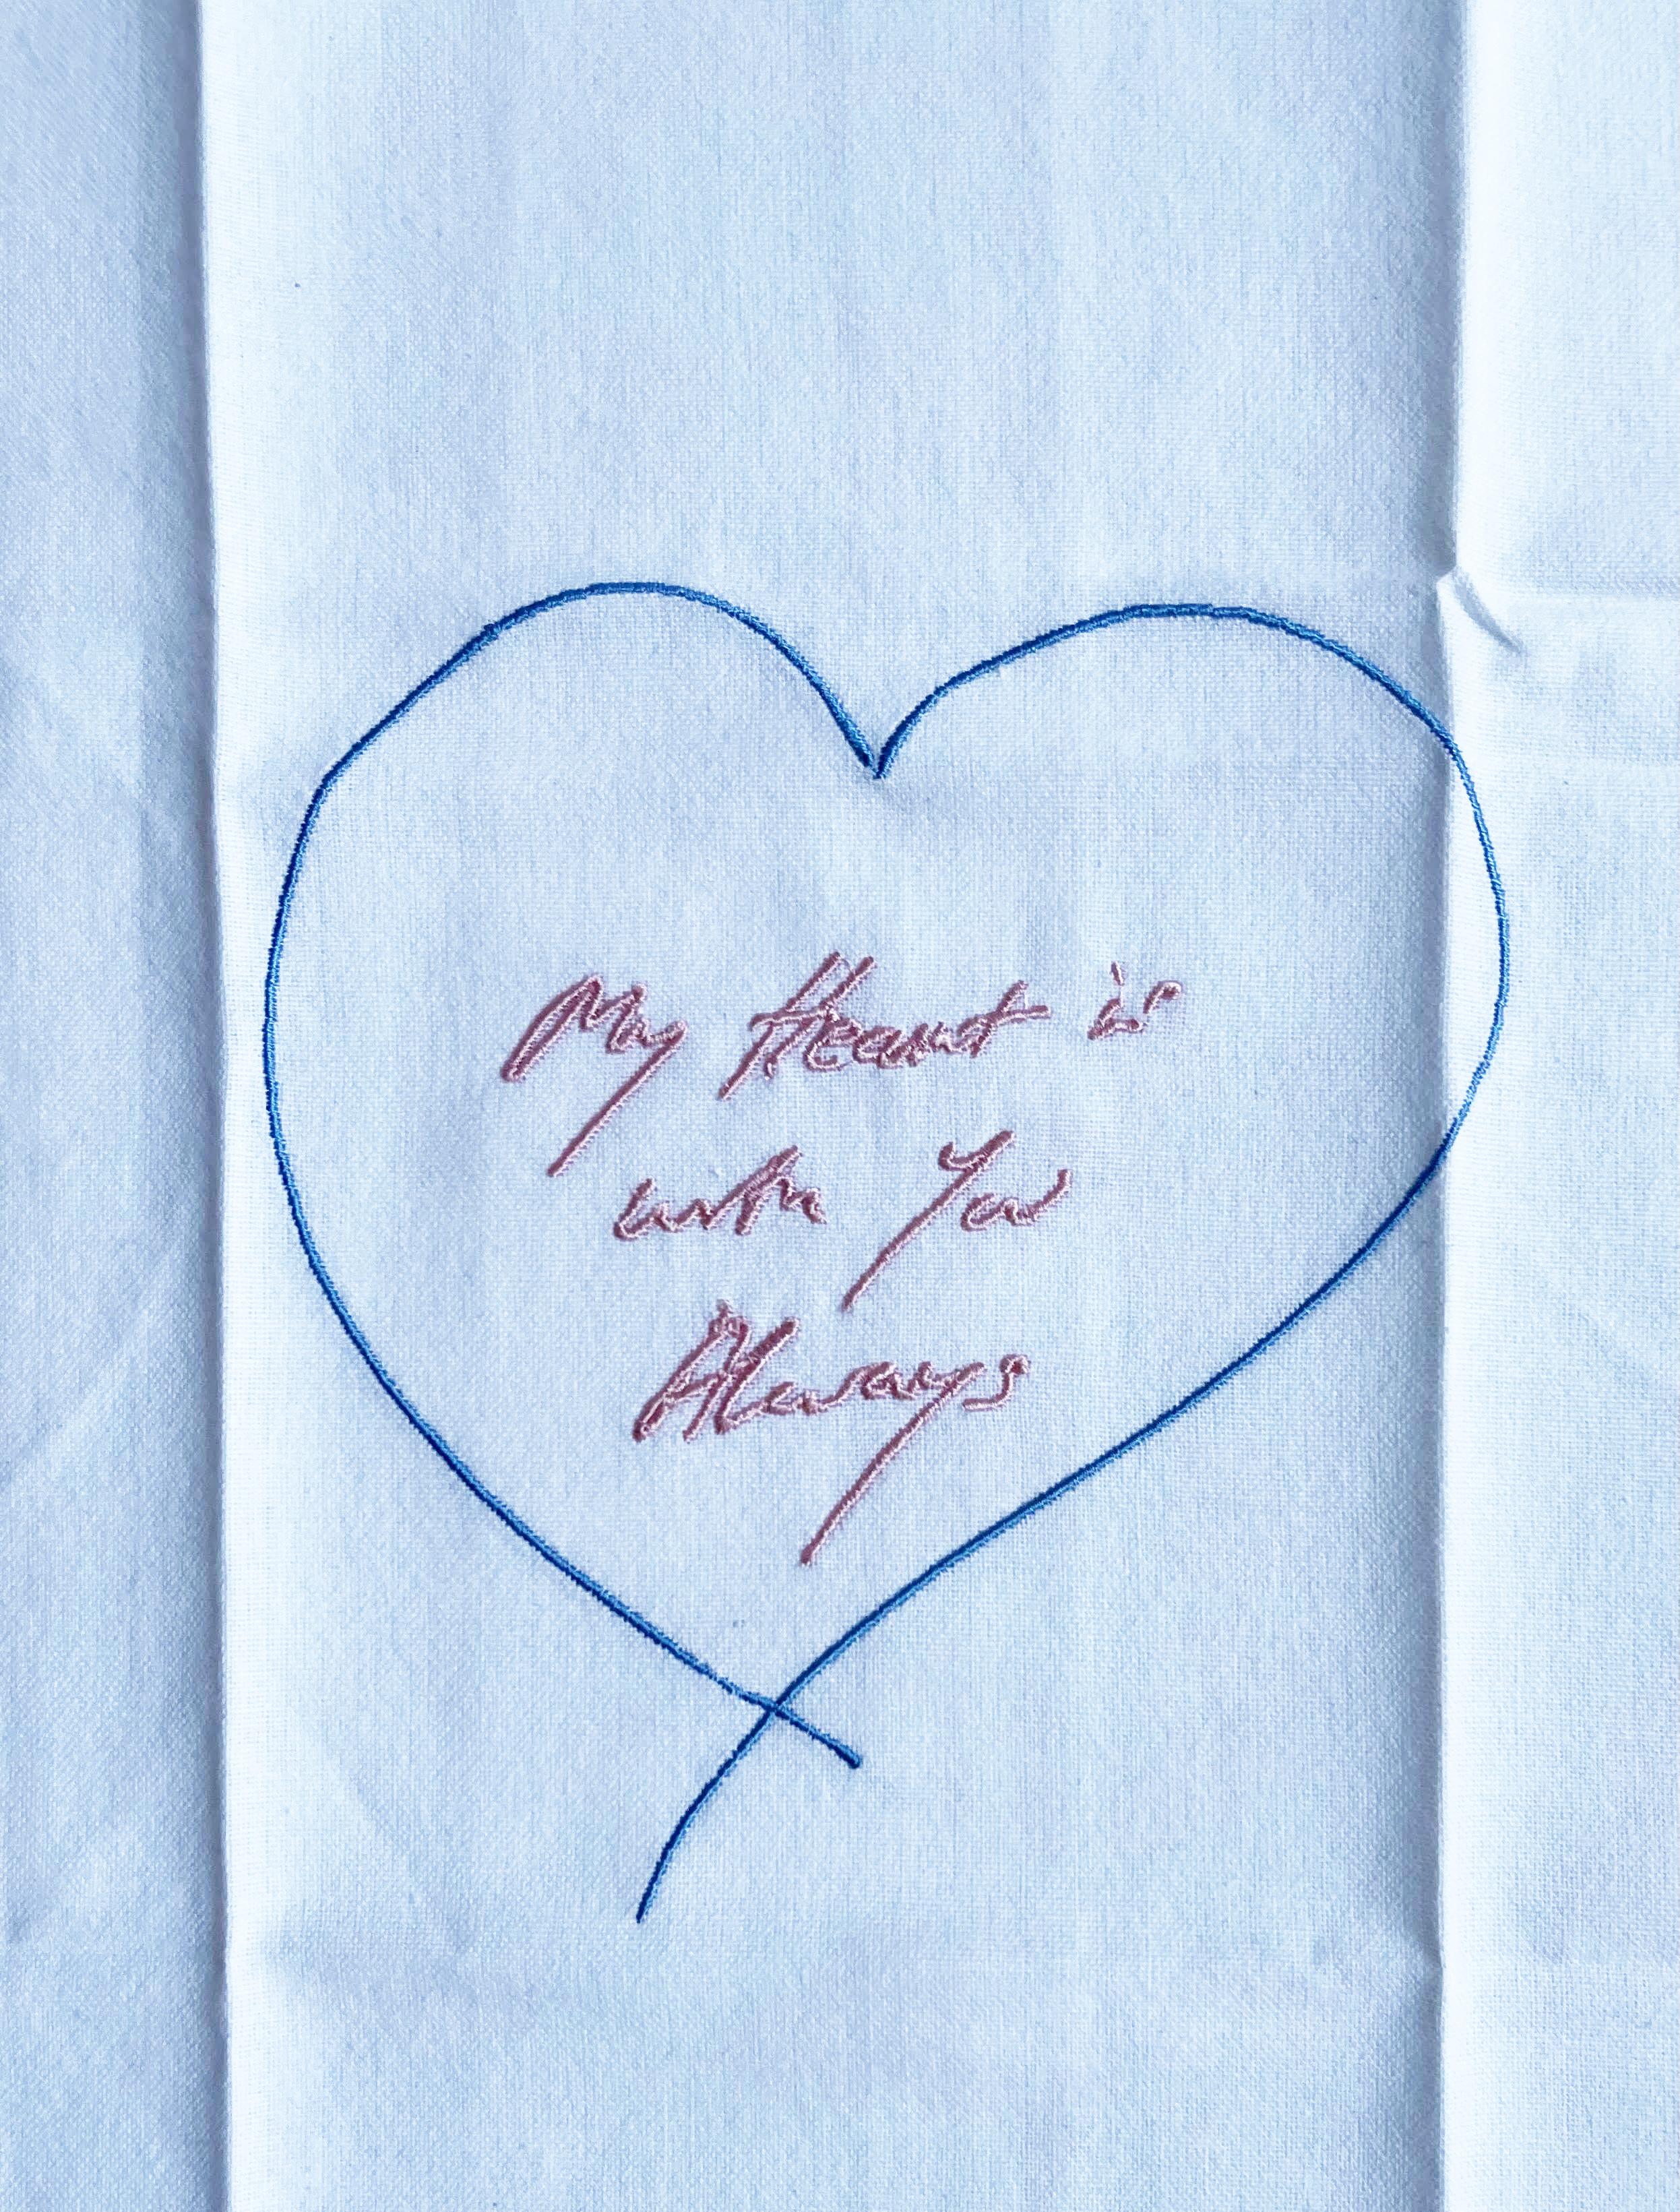 Tracey Emin
My Heart is With You Always (with hand signed and inscribed tag), 2015
Embroidered Linen Handkerchief, Signed and Inscribed in Ink by Tracey Emin on attached tag
Signed, inscribed in ink on attached tag by Tracey Emin 